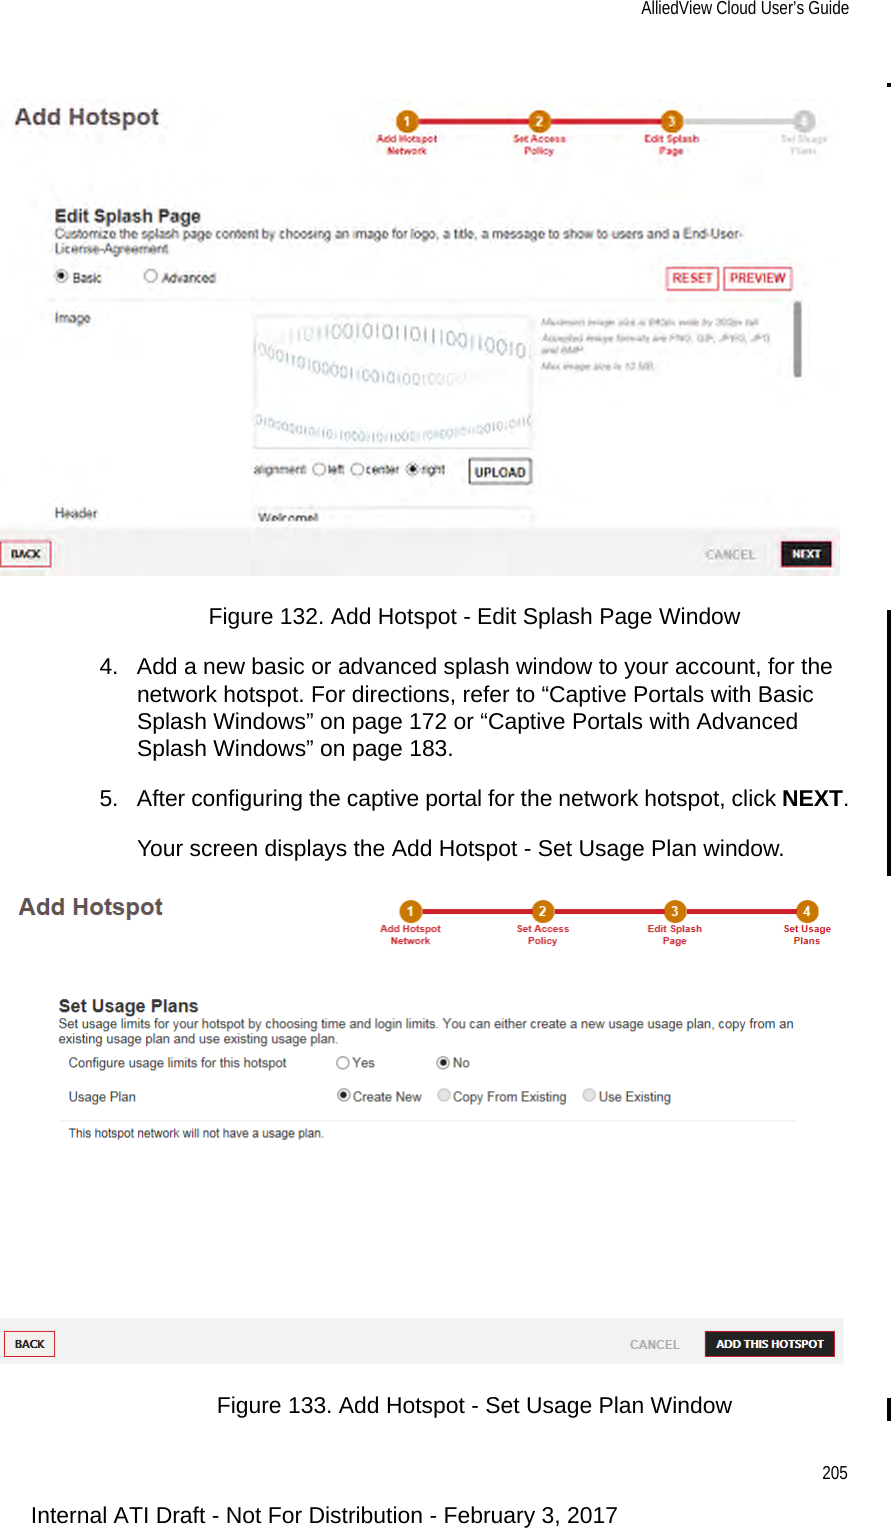 AlliedView Cloud User’s Guide205Figure 132. Add Hotspot - Edit Splash Page Window4. Add a new basic or advanced splash window to your account, for the network hotspot. For directions, refer to “Captive Portals with Basic Splash Windows” on page 172 or “Captive Portals with Advanced Splash Windows” on page 183.5. After configuring the captive portal for the network hotspot, click NEXT.Your screen displays the Add Hotspot - Set Usage Plan window.Figure 133. Add Hotspot - Set Usage Plan WindowInternal ATI Draft - Not For Distribution - February 3, 2017